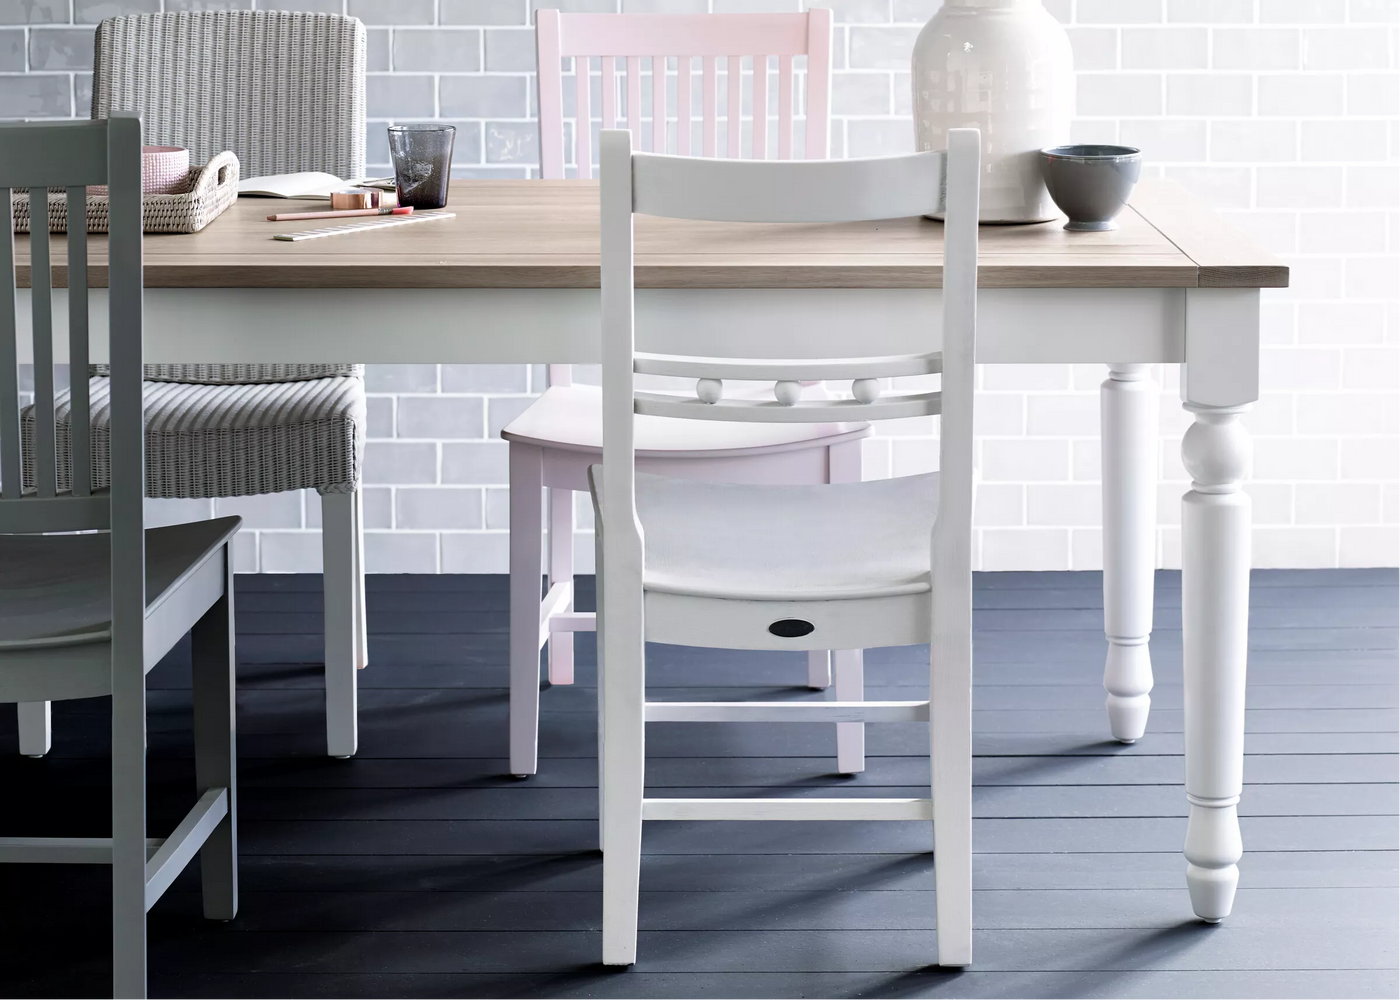 Neptune Suffolk Dining Collection available at Hunters Furniture Derby